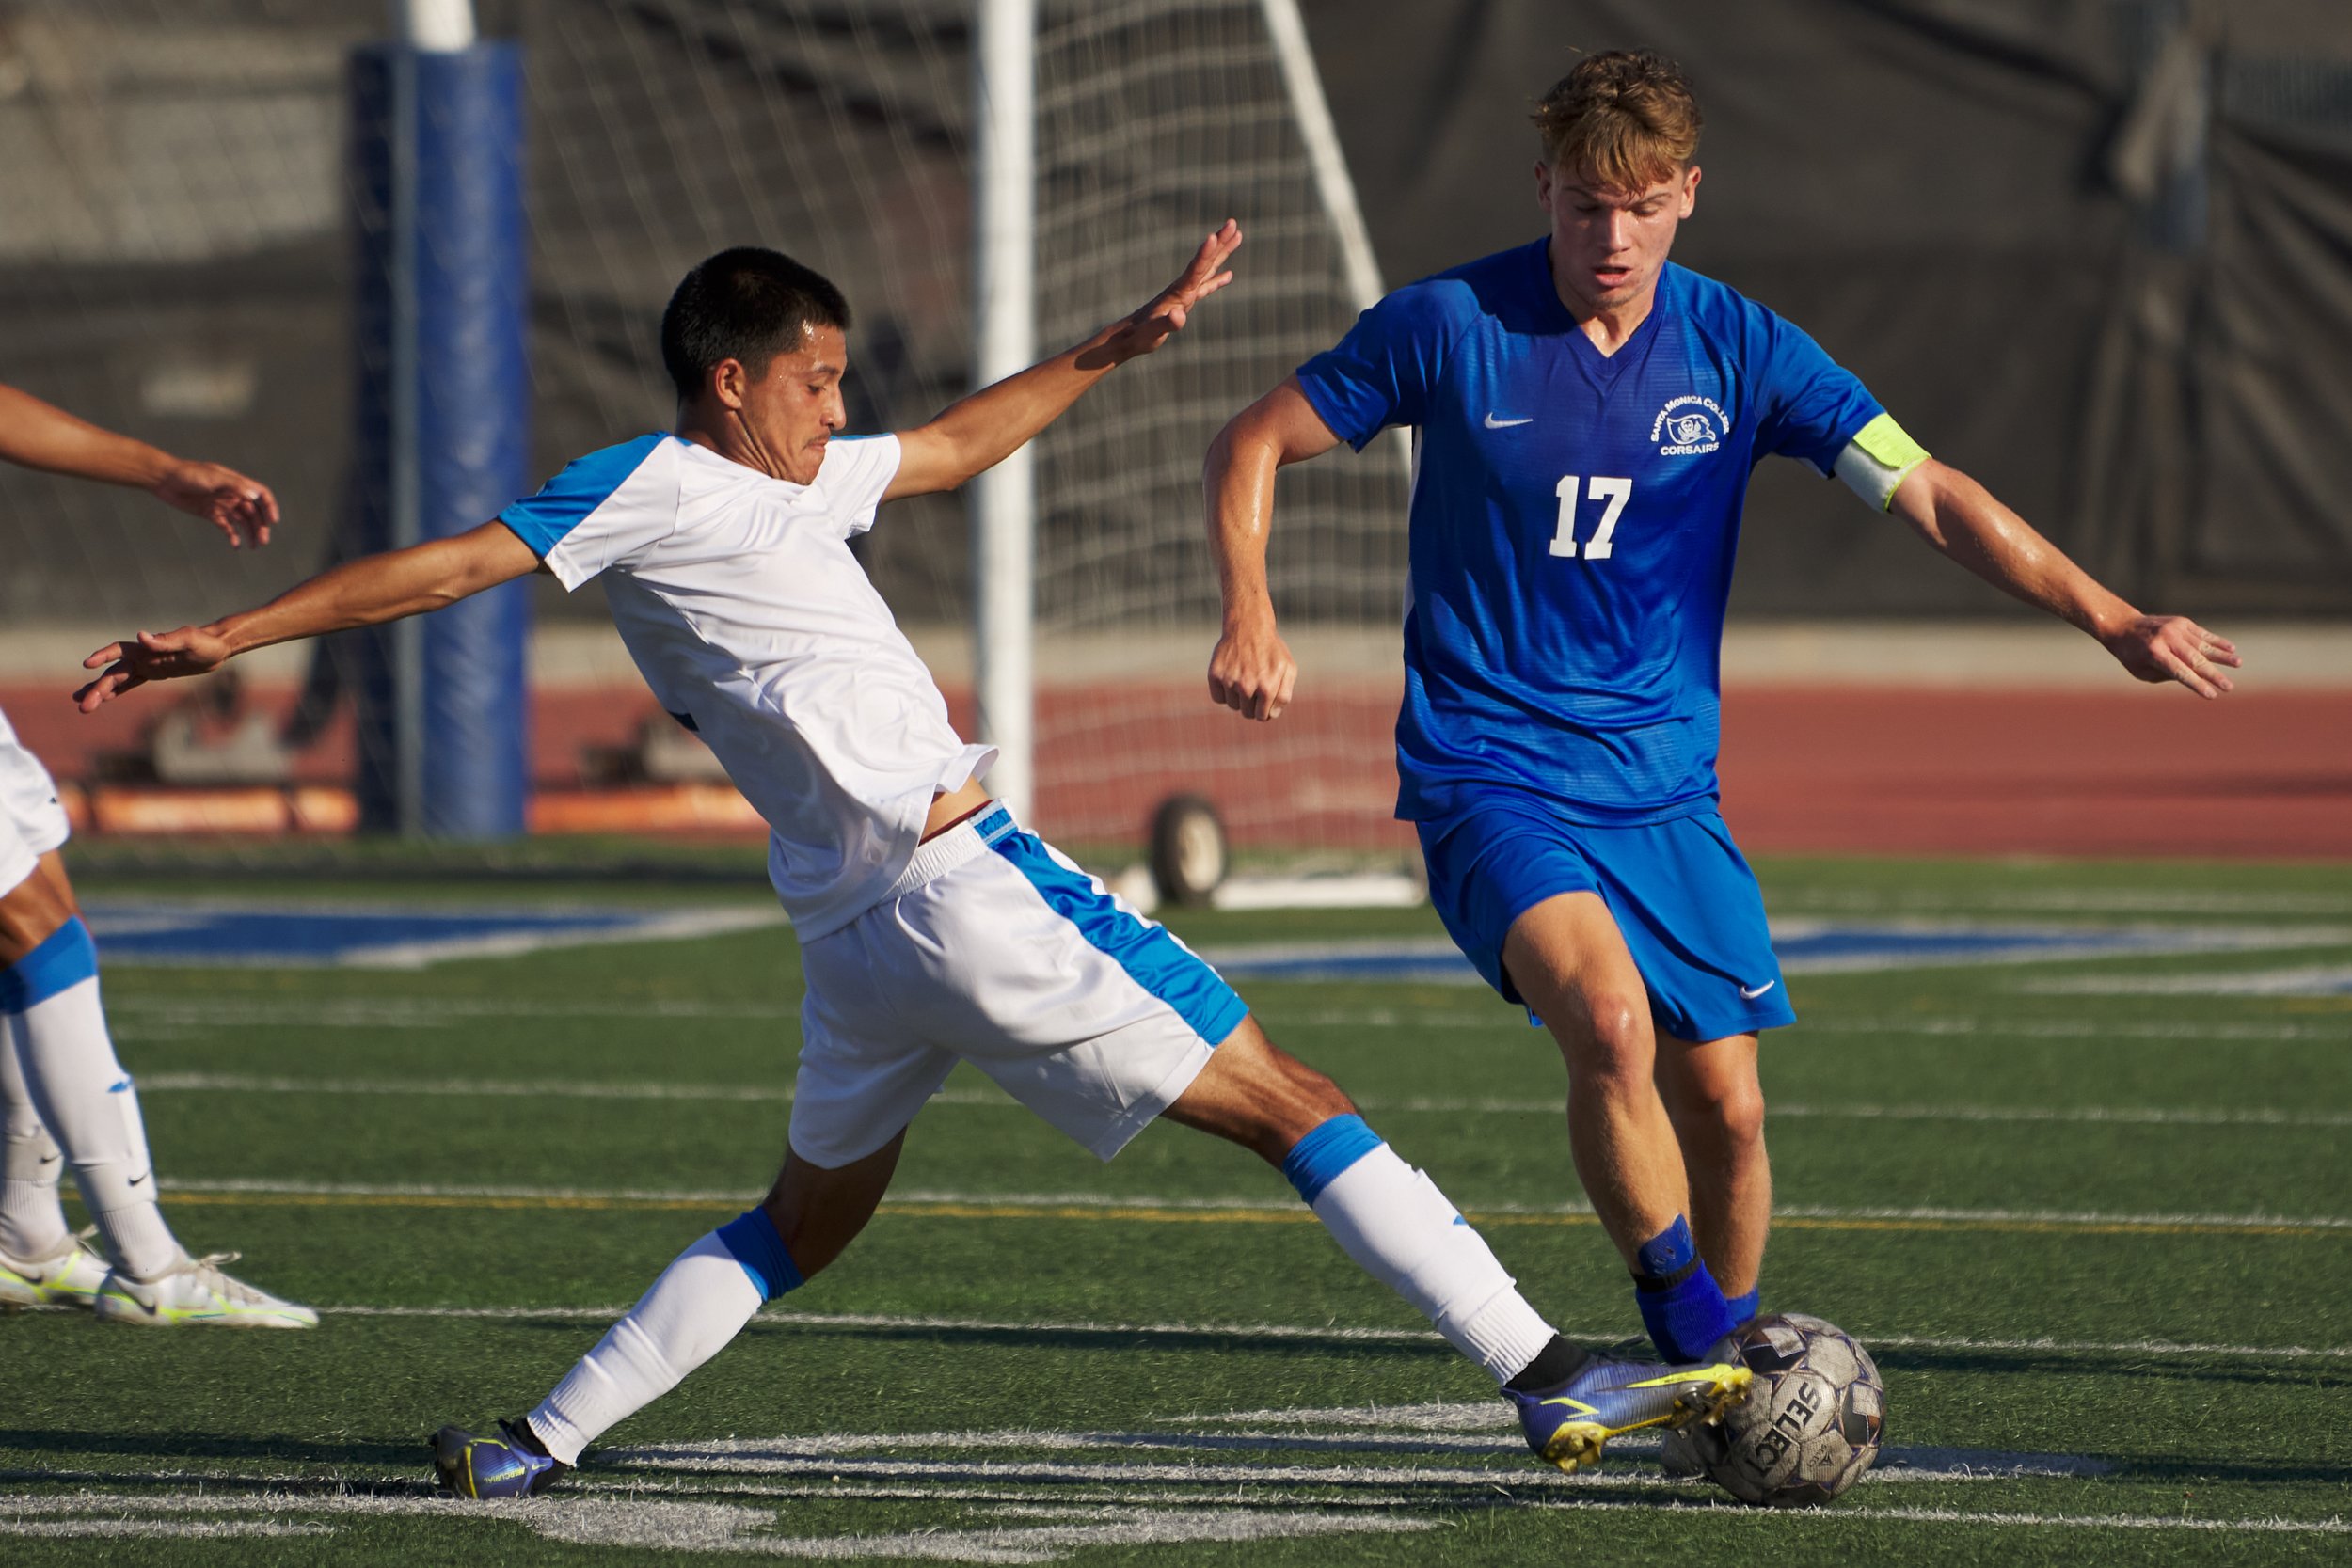  Oxnard College Condors' Diego Briceno attempts to steal the ball from Santa Monica College Corsairs' Taj Winnard during the men's soccer match on Tuesday, Oct. 18, 2022, at Corsair Field in Santa Monica, Calif. The Corsairs lost 0-3. (Nicholas McCal